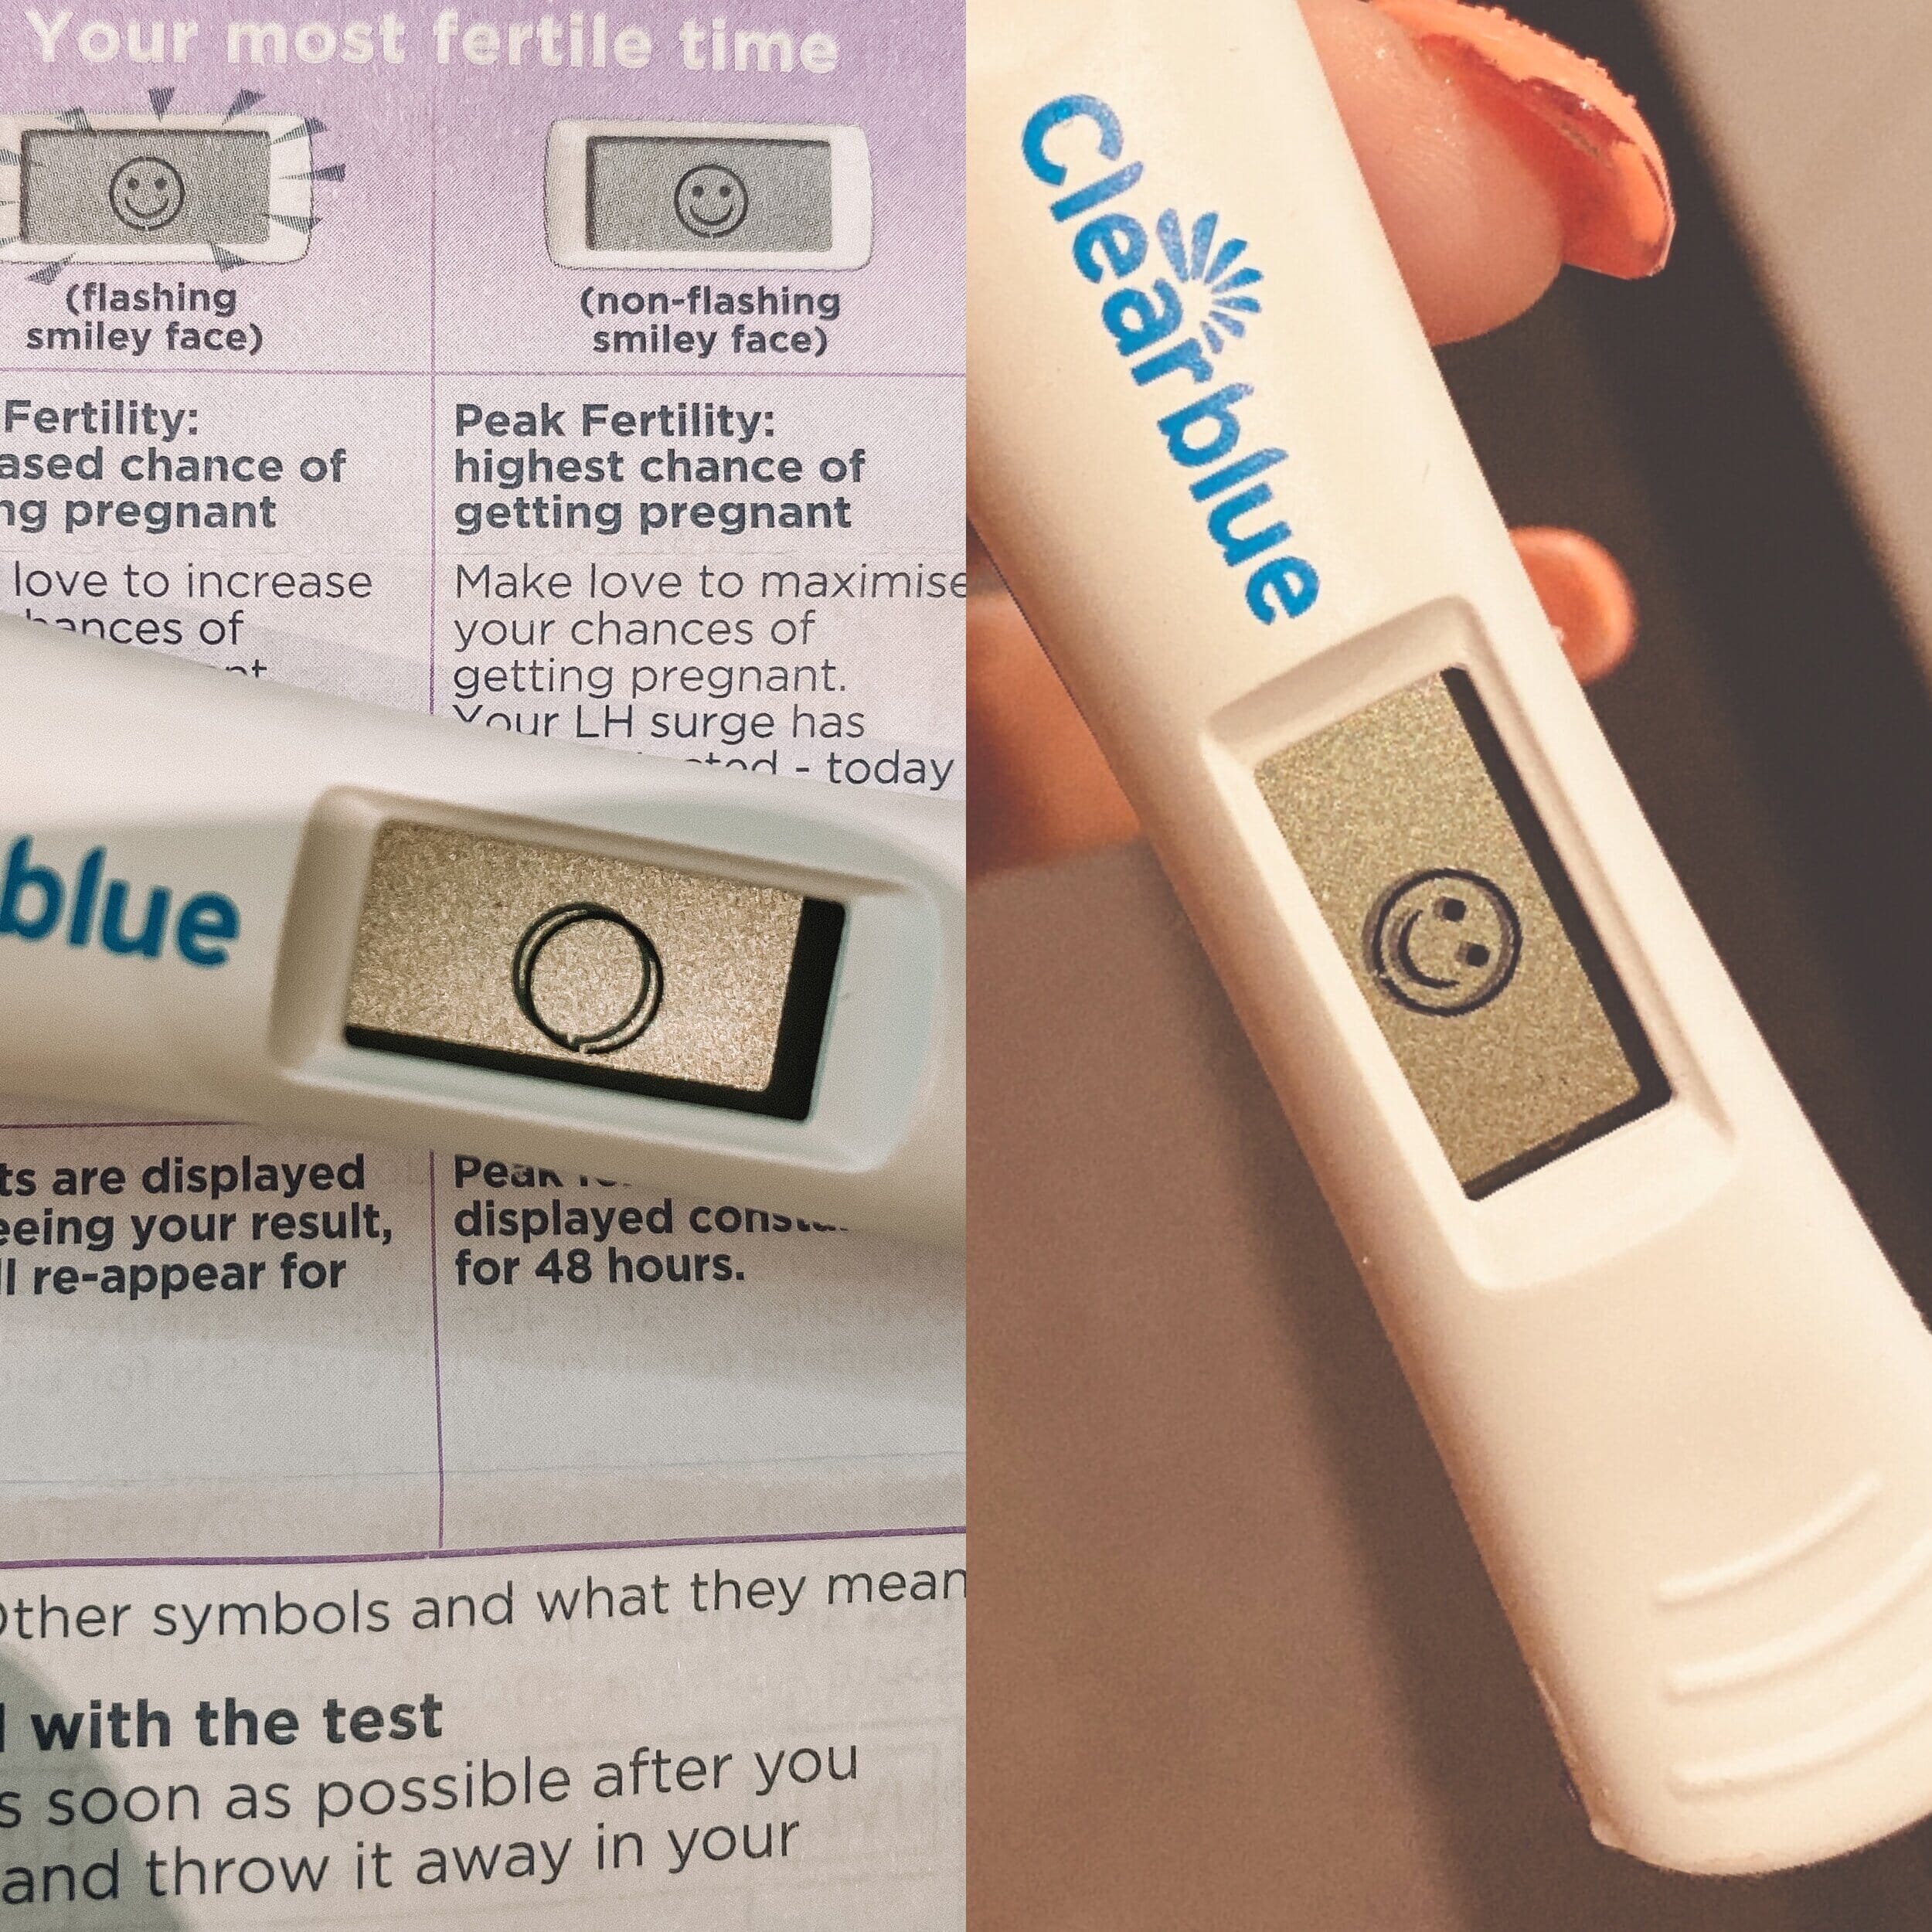 two clear blue ovulation tests